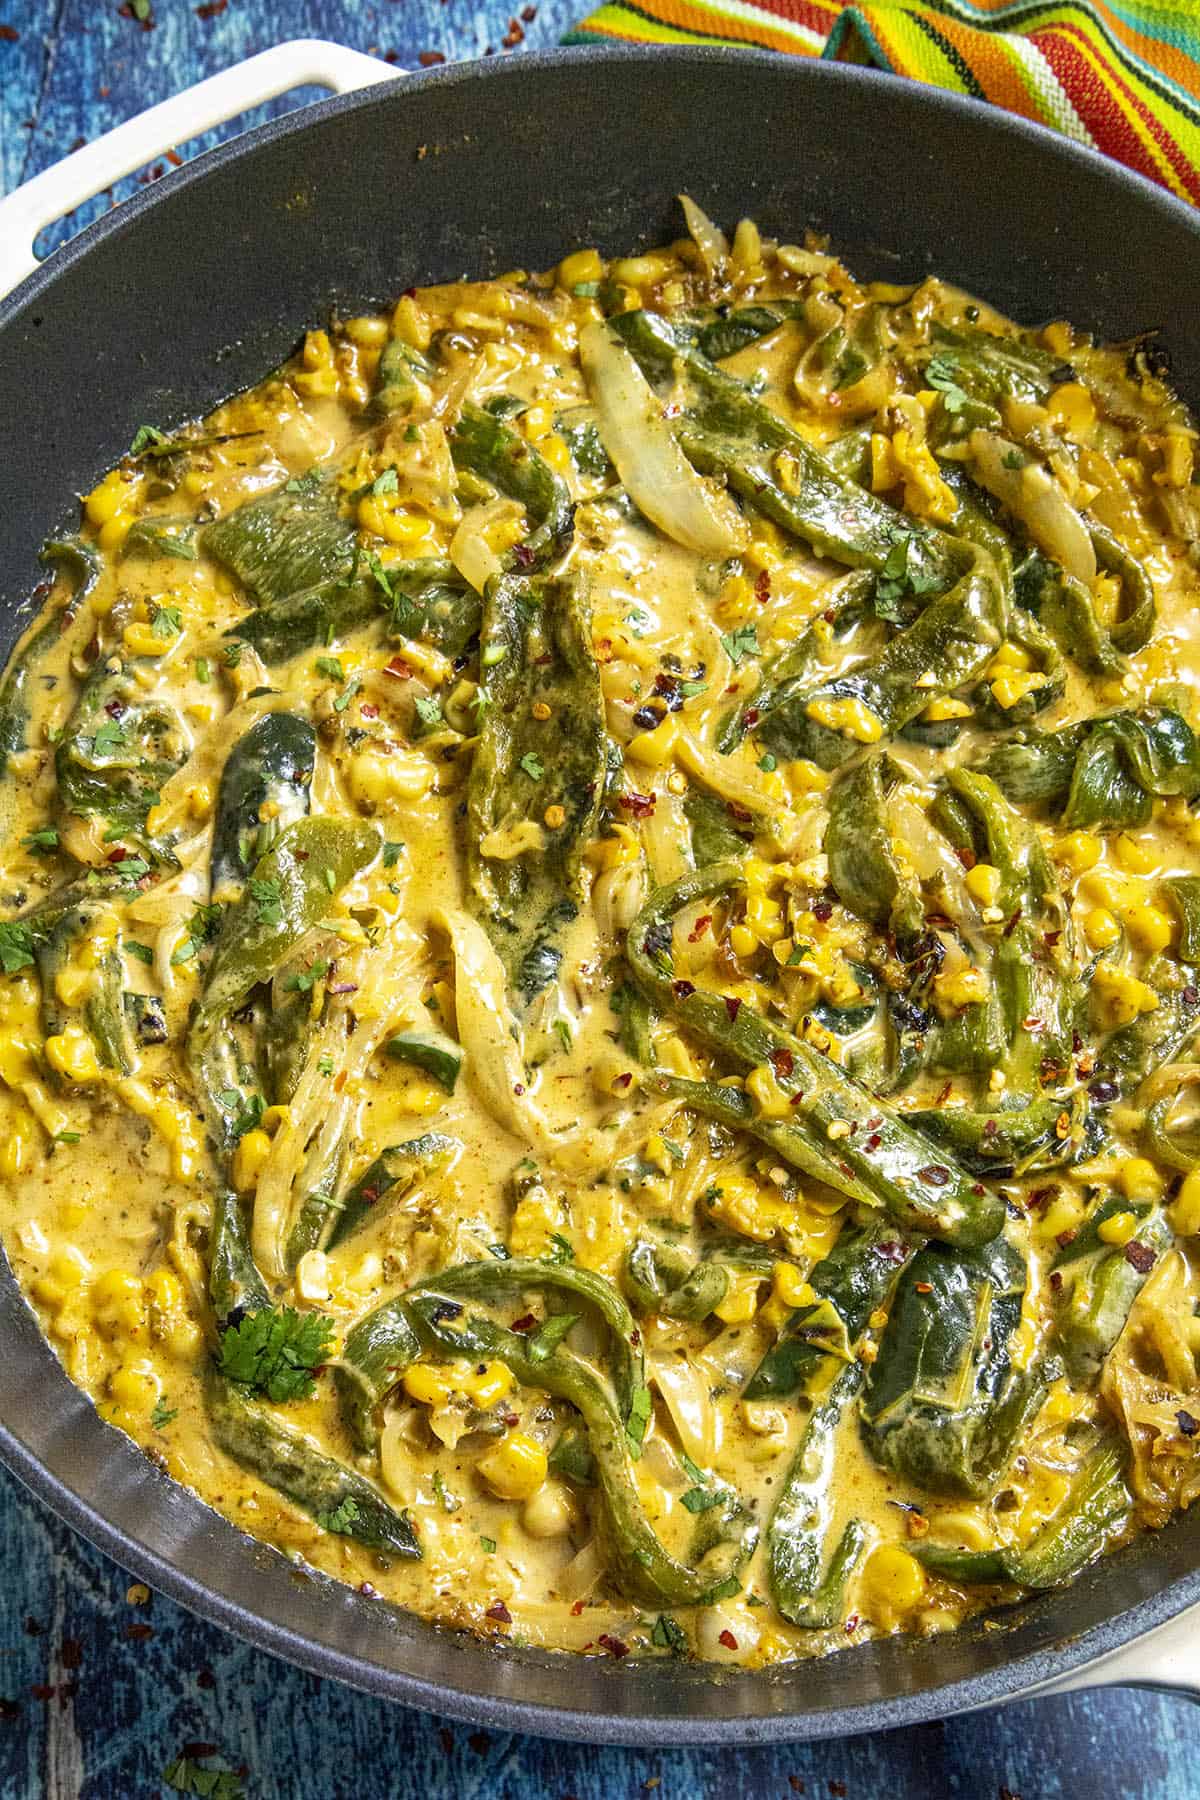 Creamy Rajas Poblanas in a pan, ready to serve